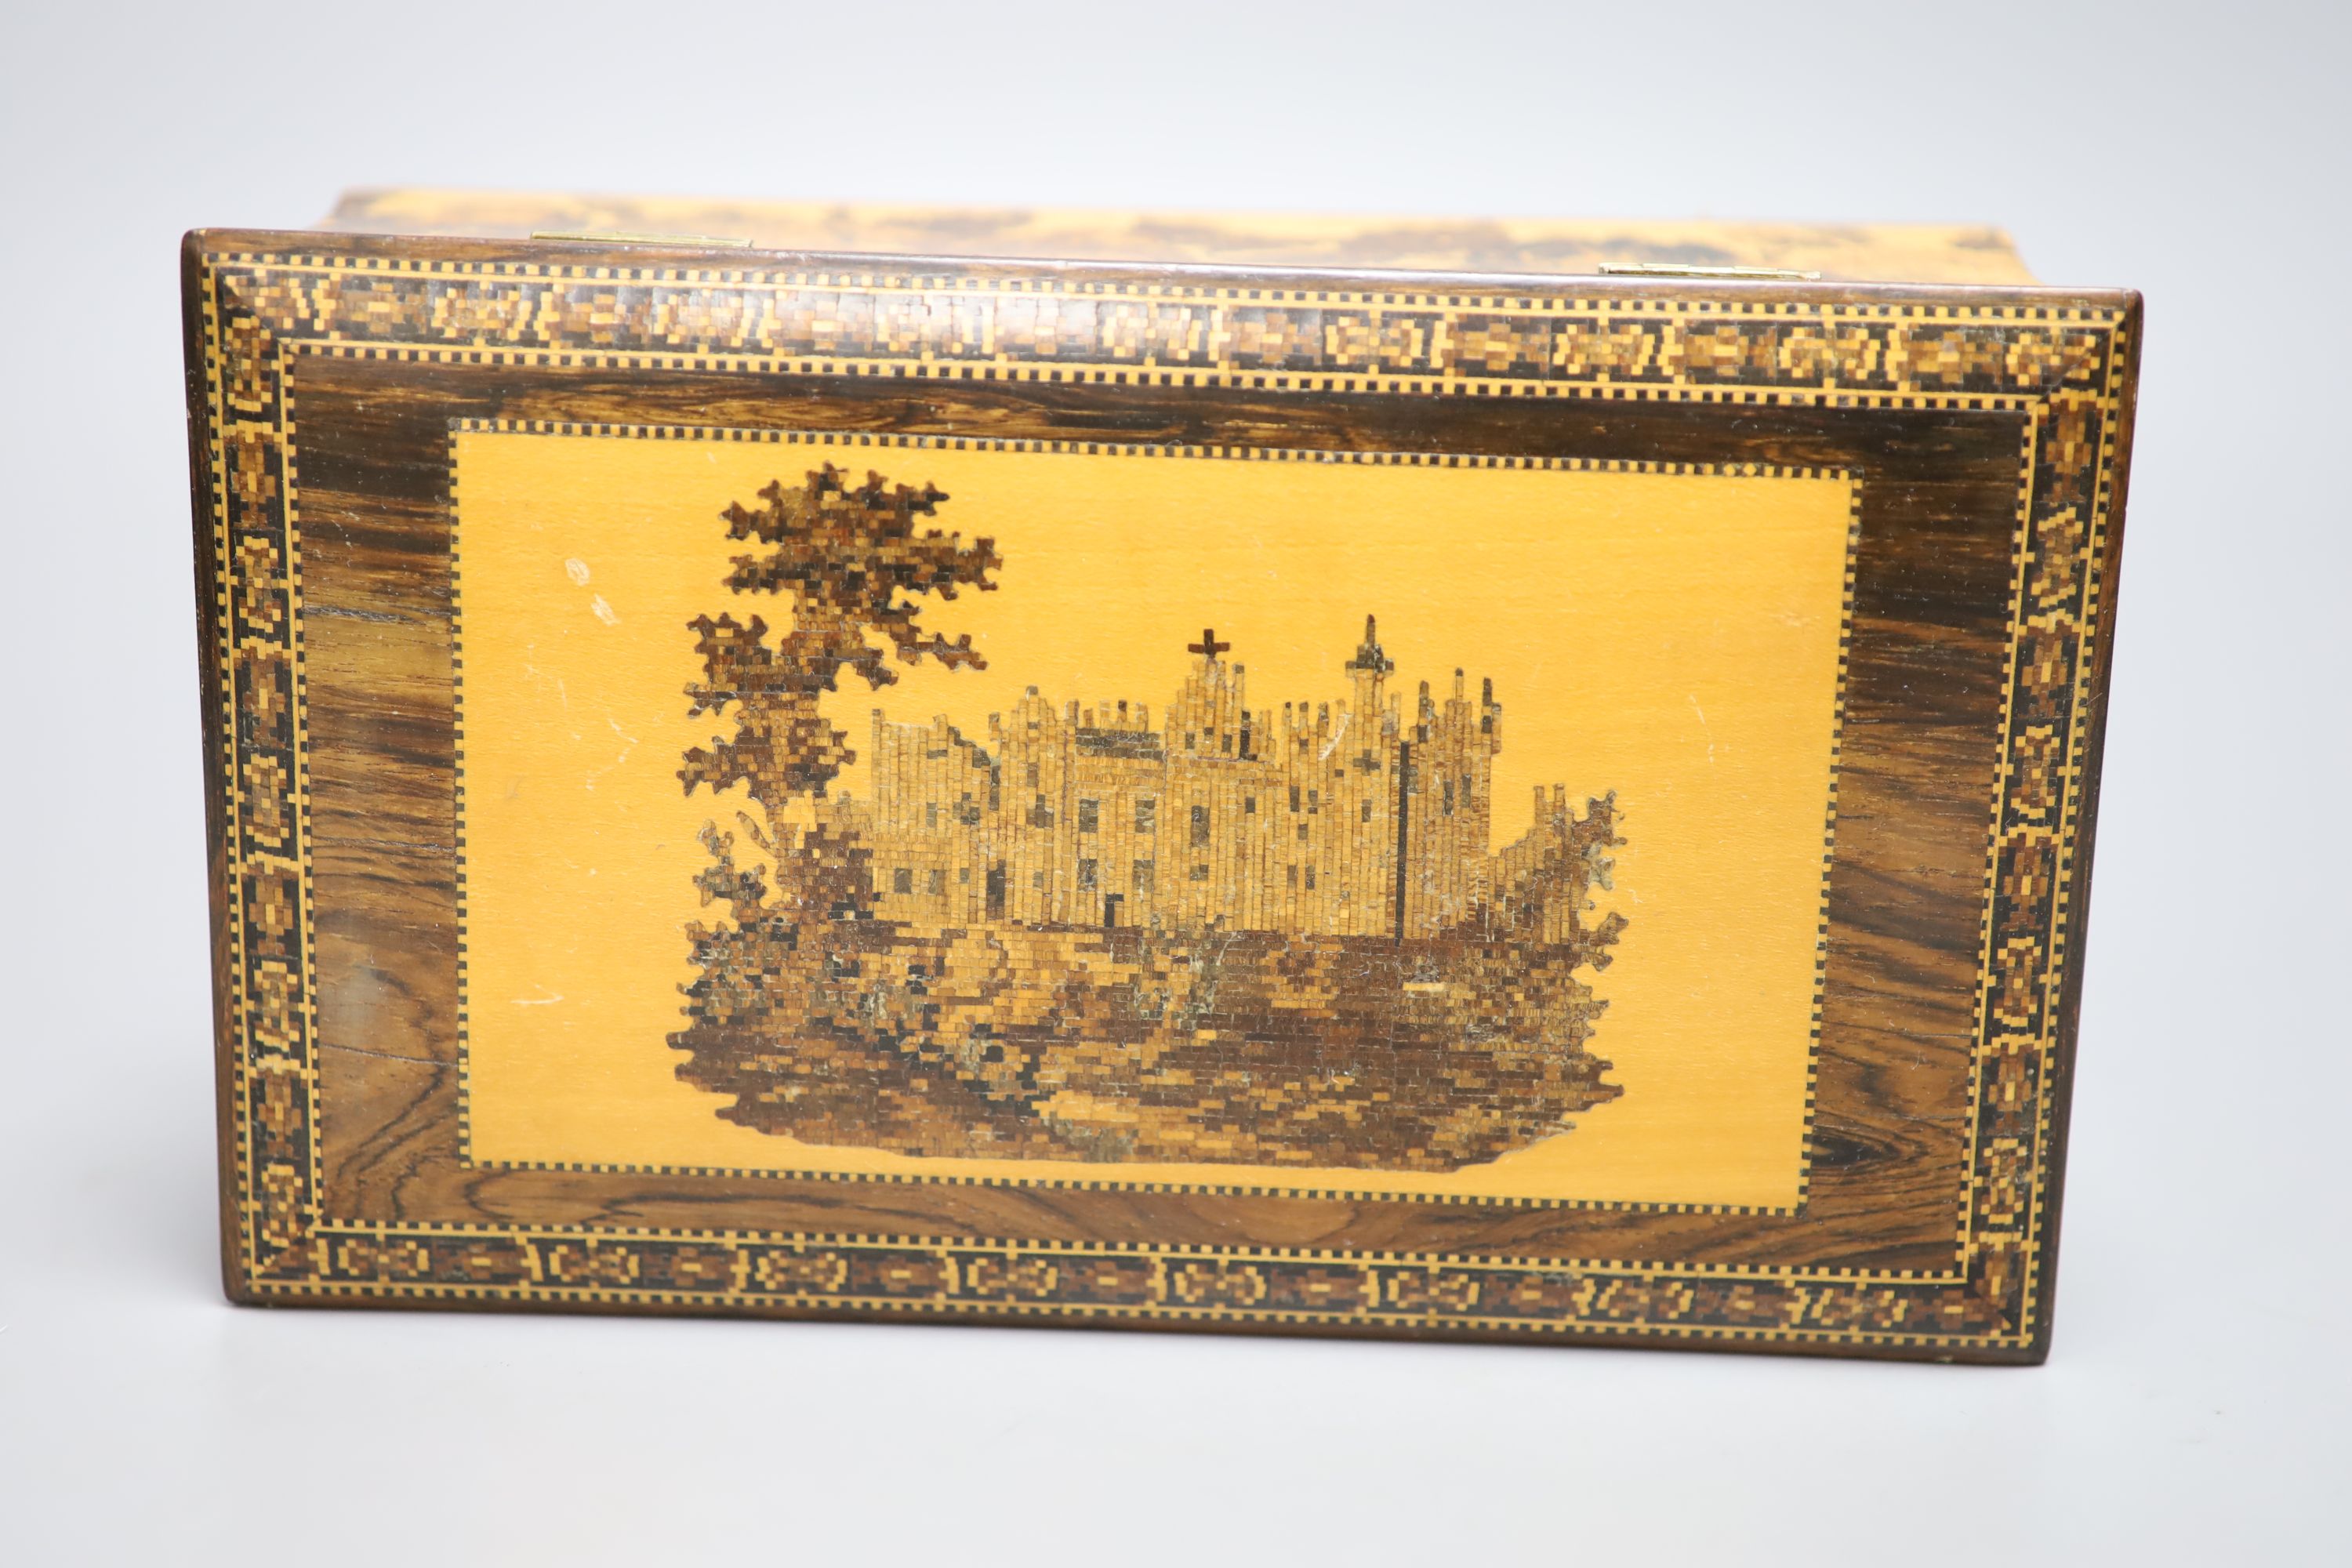 A Tunbridge ware rosewood and tesserae mosaic 'Abbotsford' box, by Henry Hollamby, mid 19th century, 21.5cm